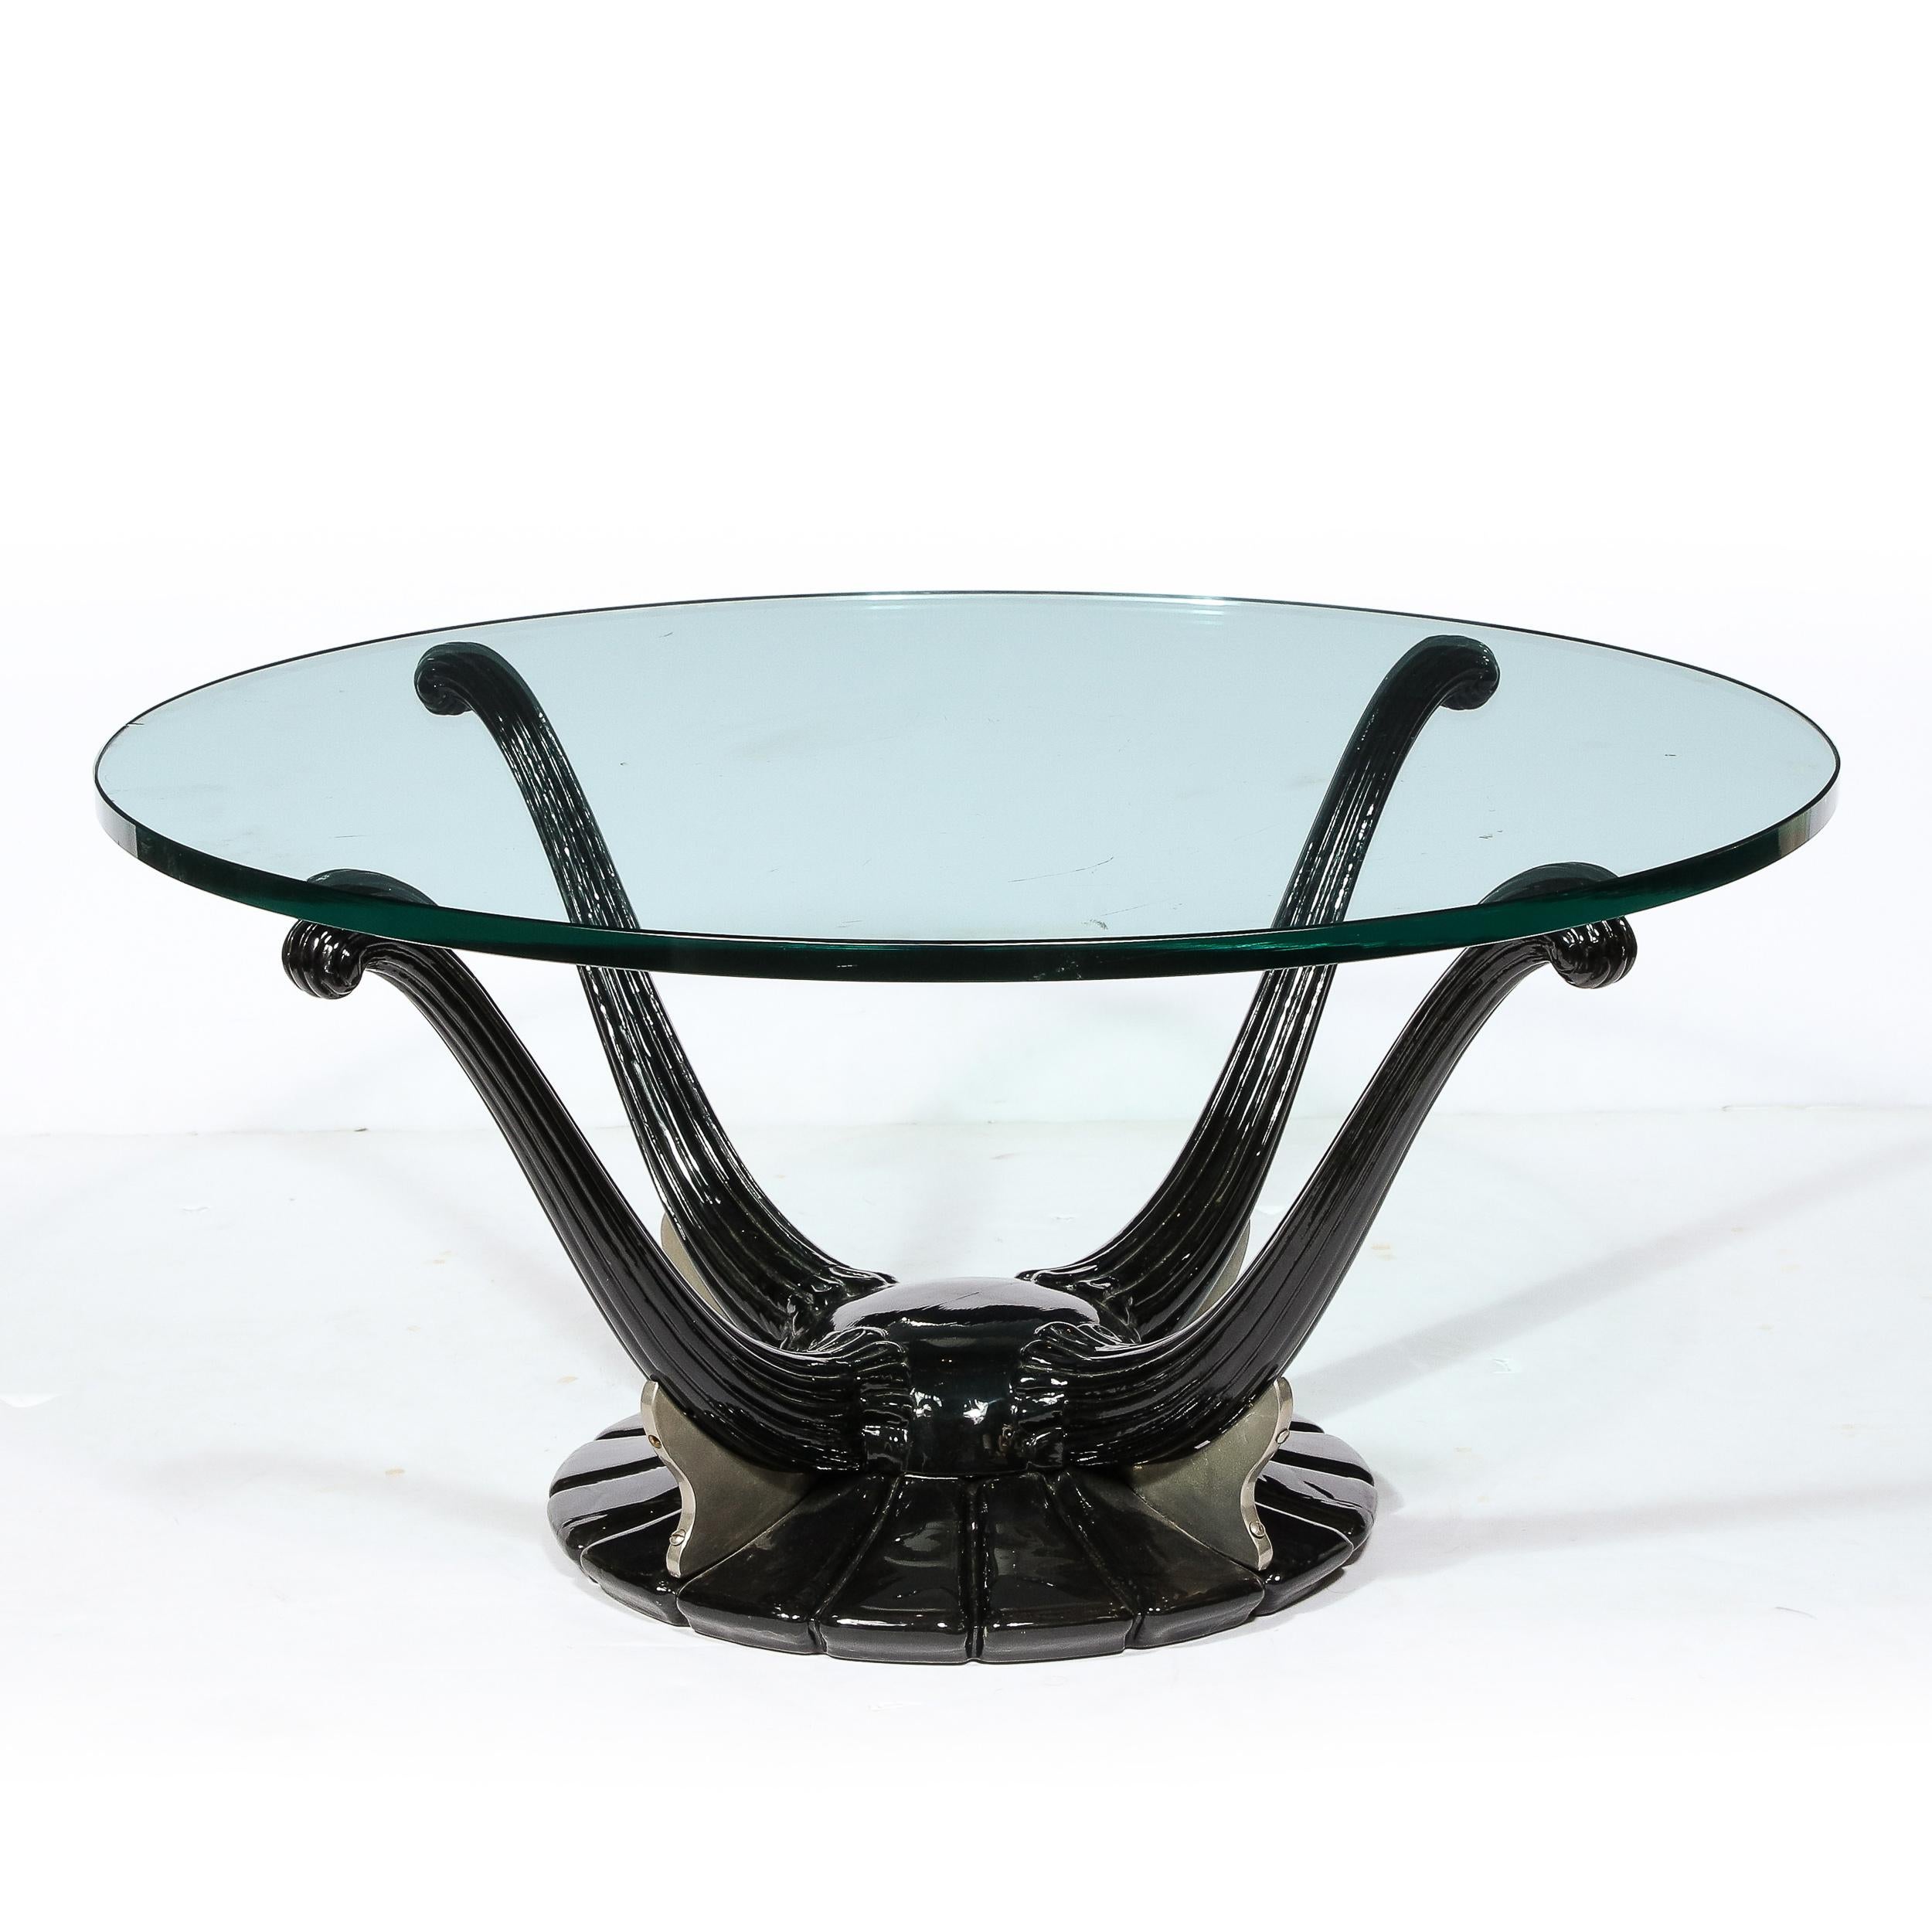 This refined Art Deco style cocktail table was realized- in the manner of Ruhlmann- in the United States during the 20th century. The piece features a graphic and stylized base consisting of four scroll form fluted tendrils that extend out